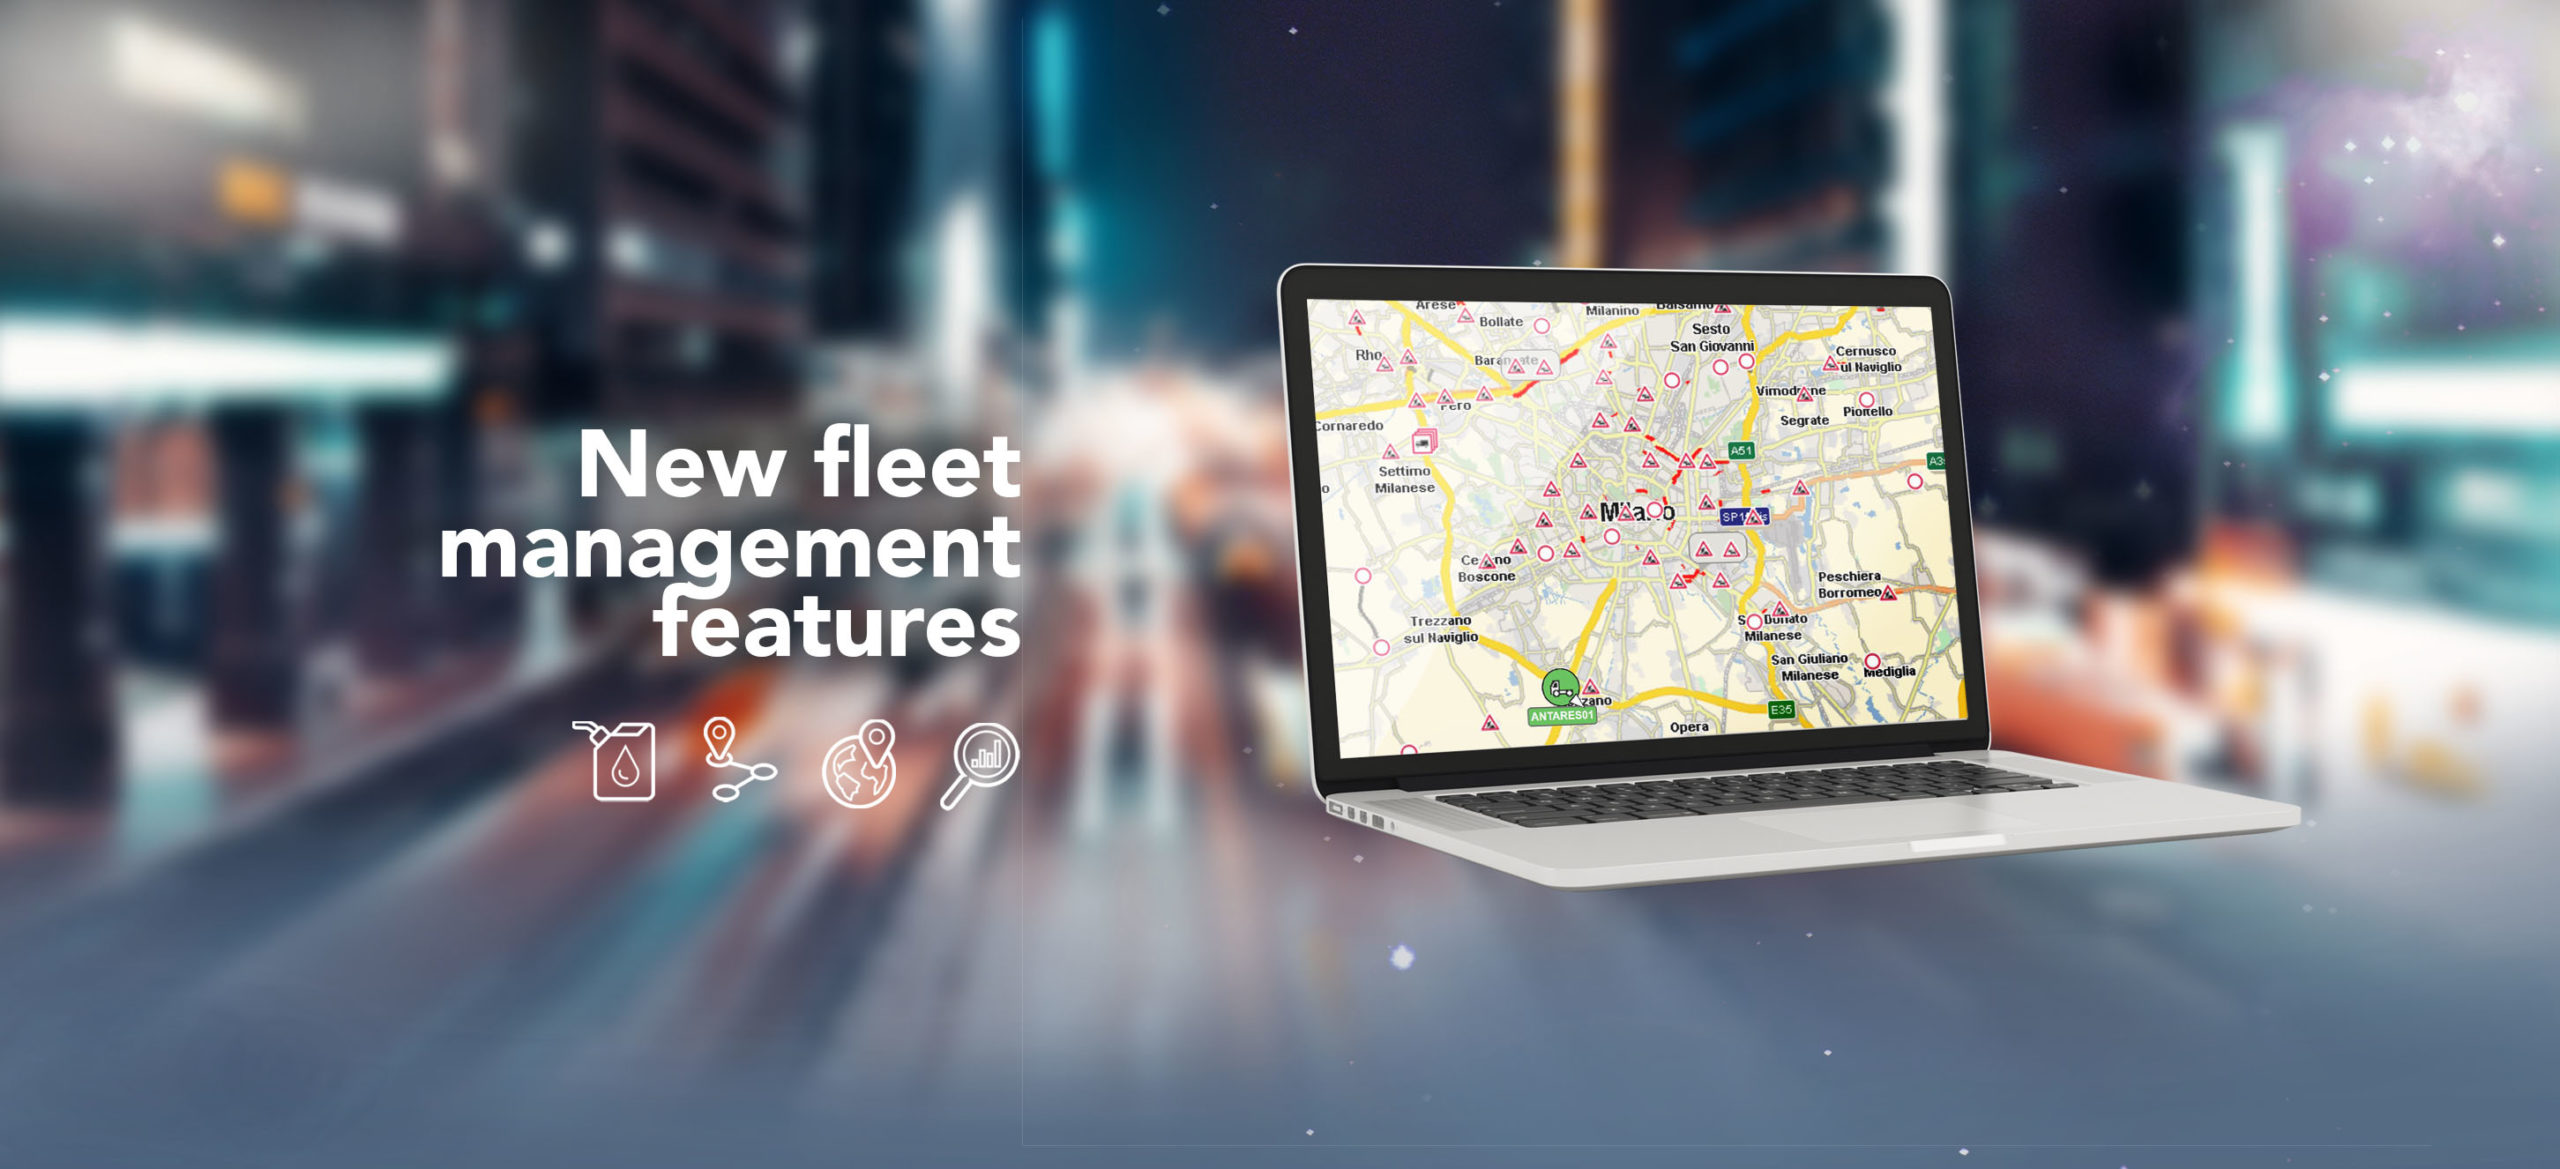 FLEET MANAGEMENT: HERE ARE THE NEW FEATURES